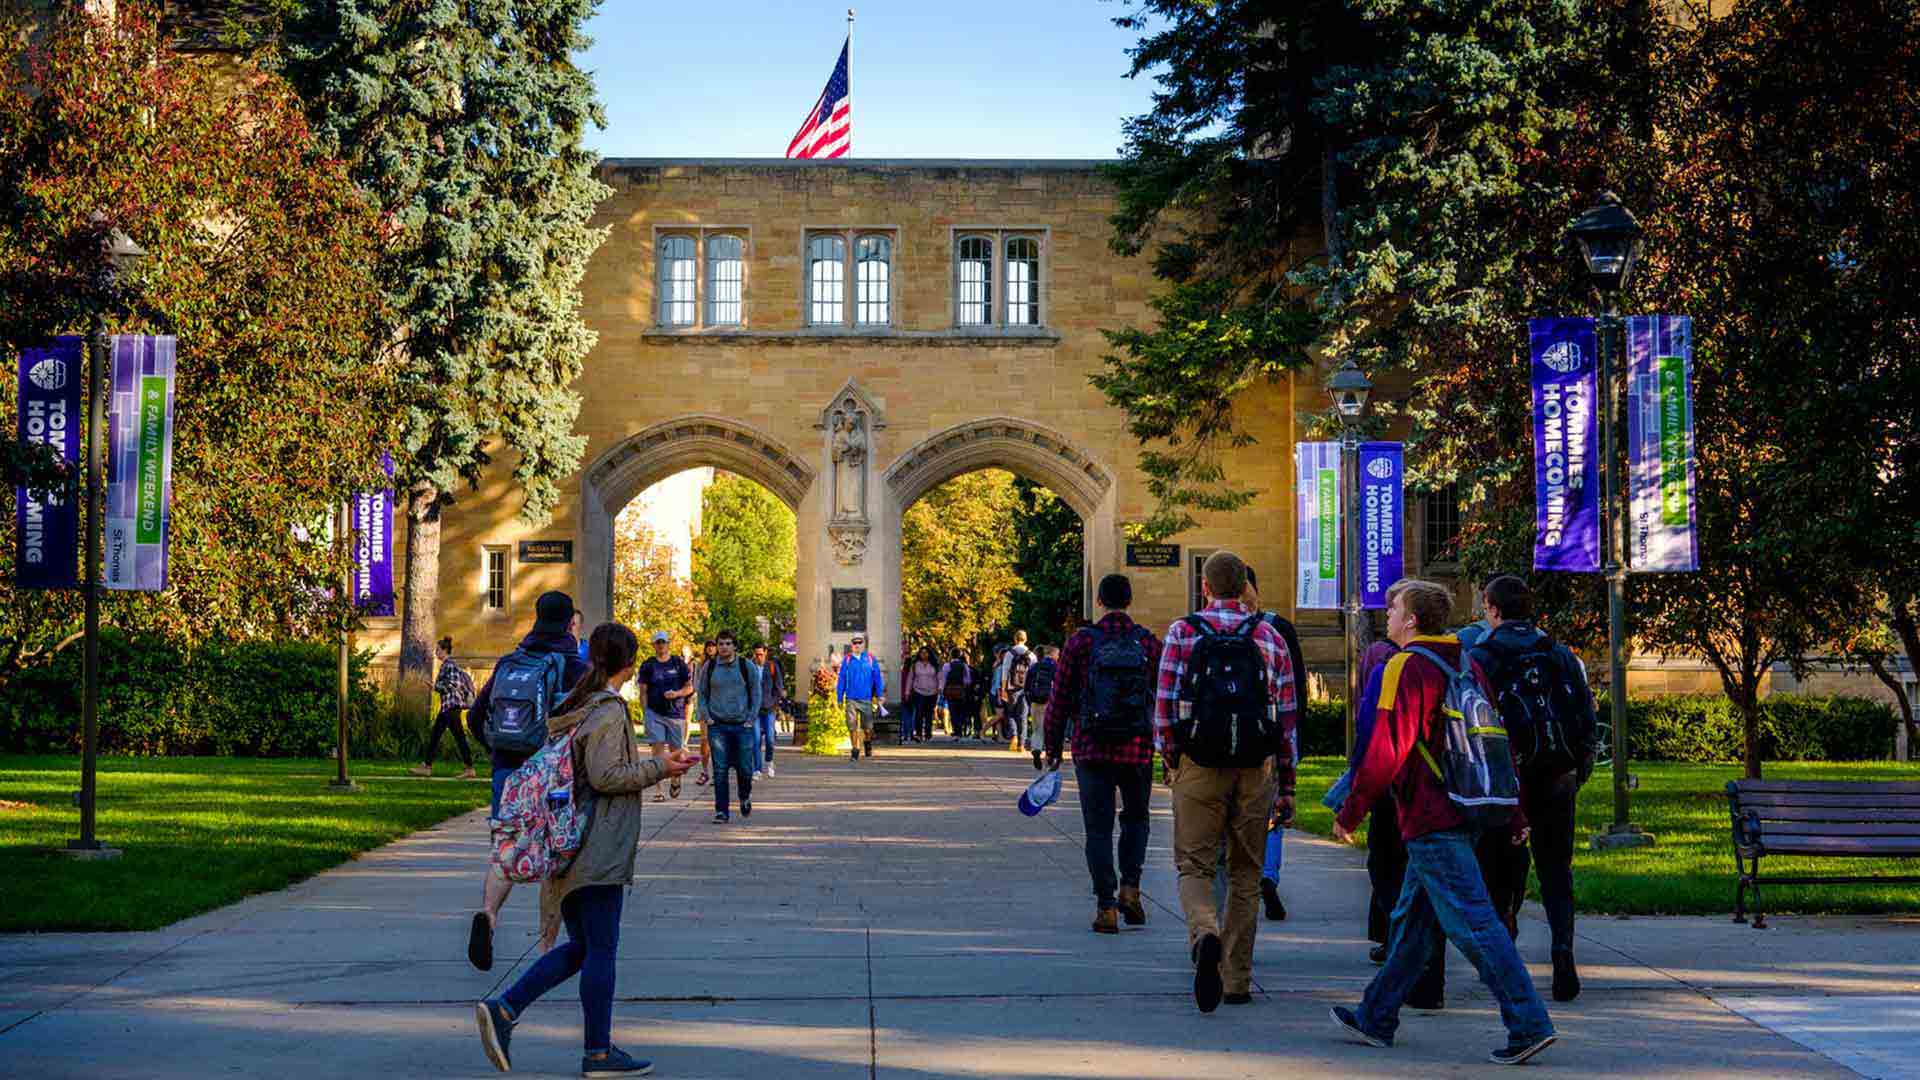 Photo of the Arches at the University of St. Thomas with students in the front walking towards the Arches